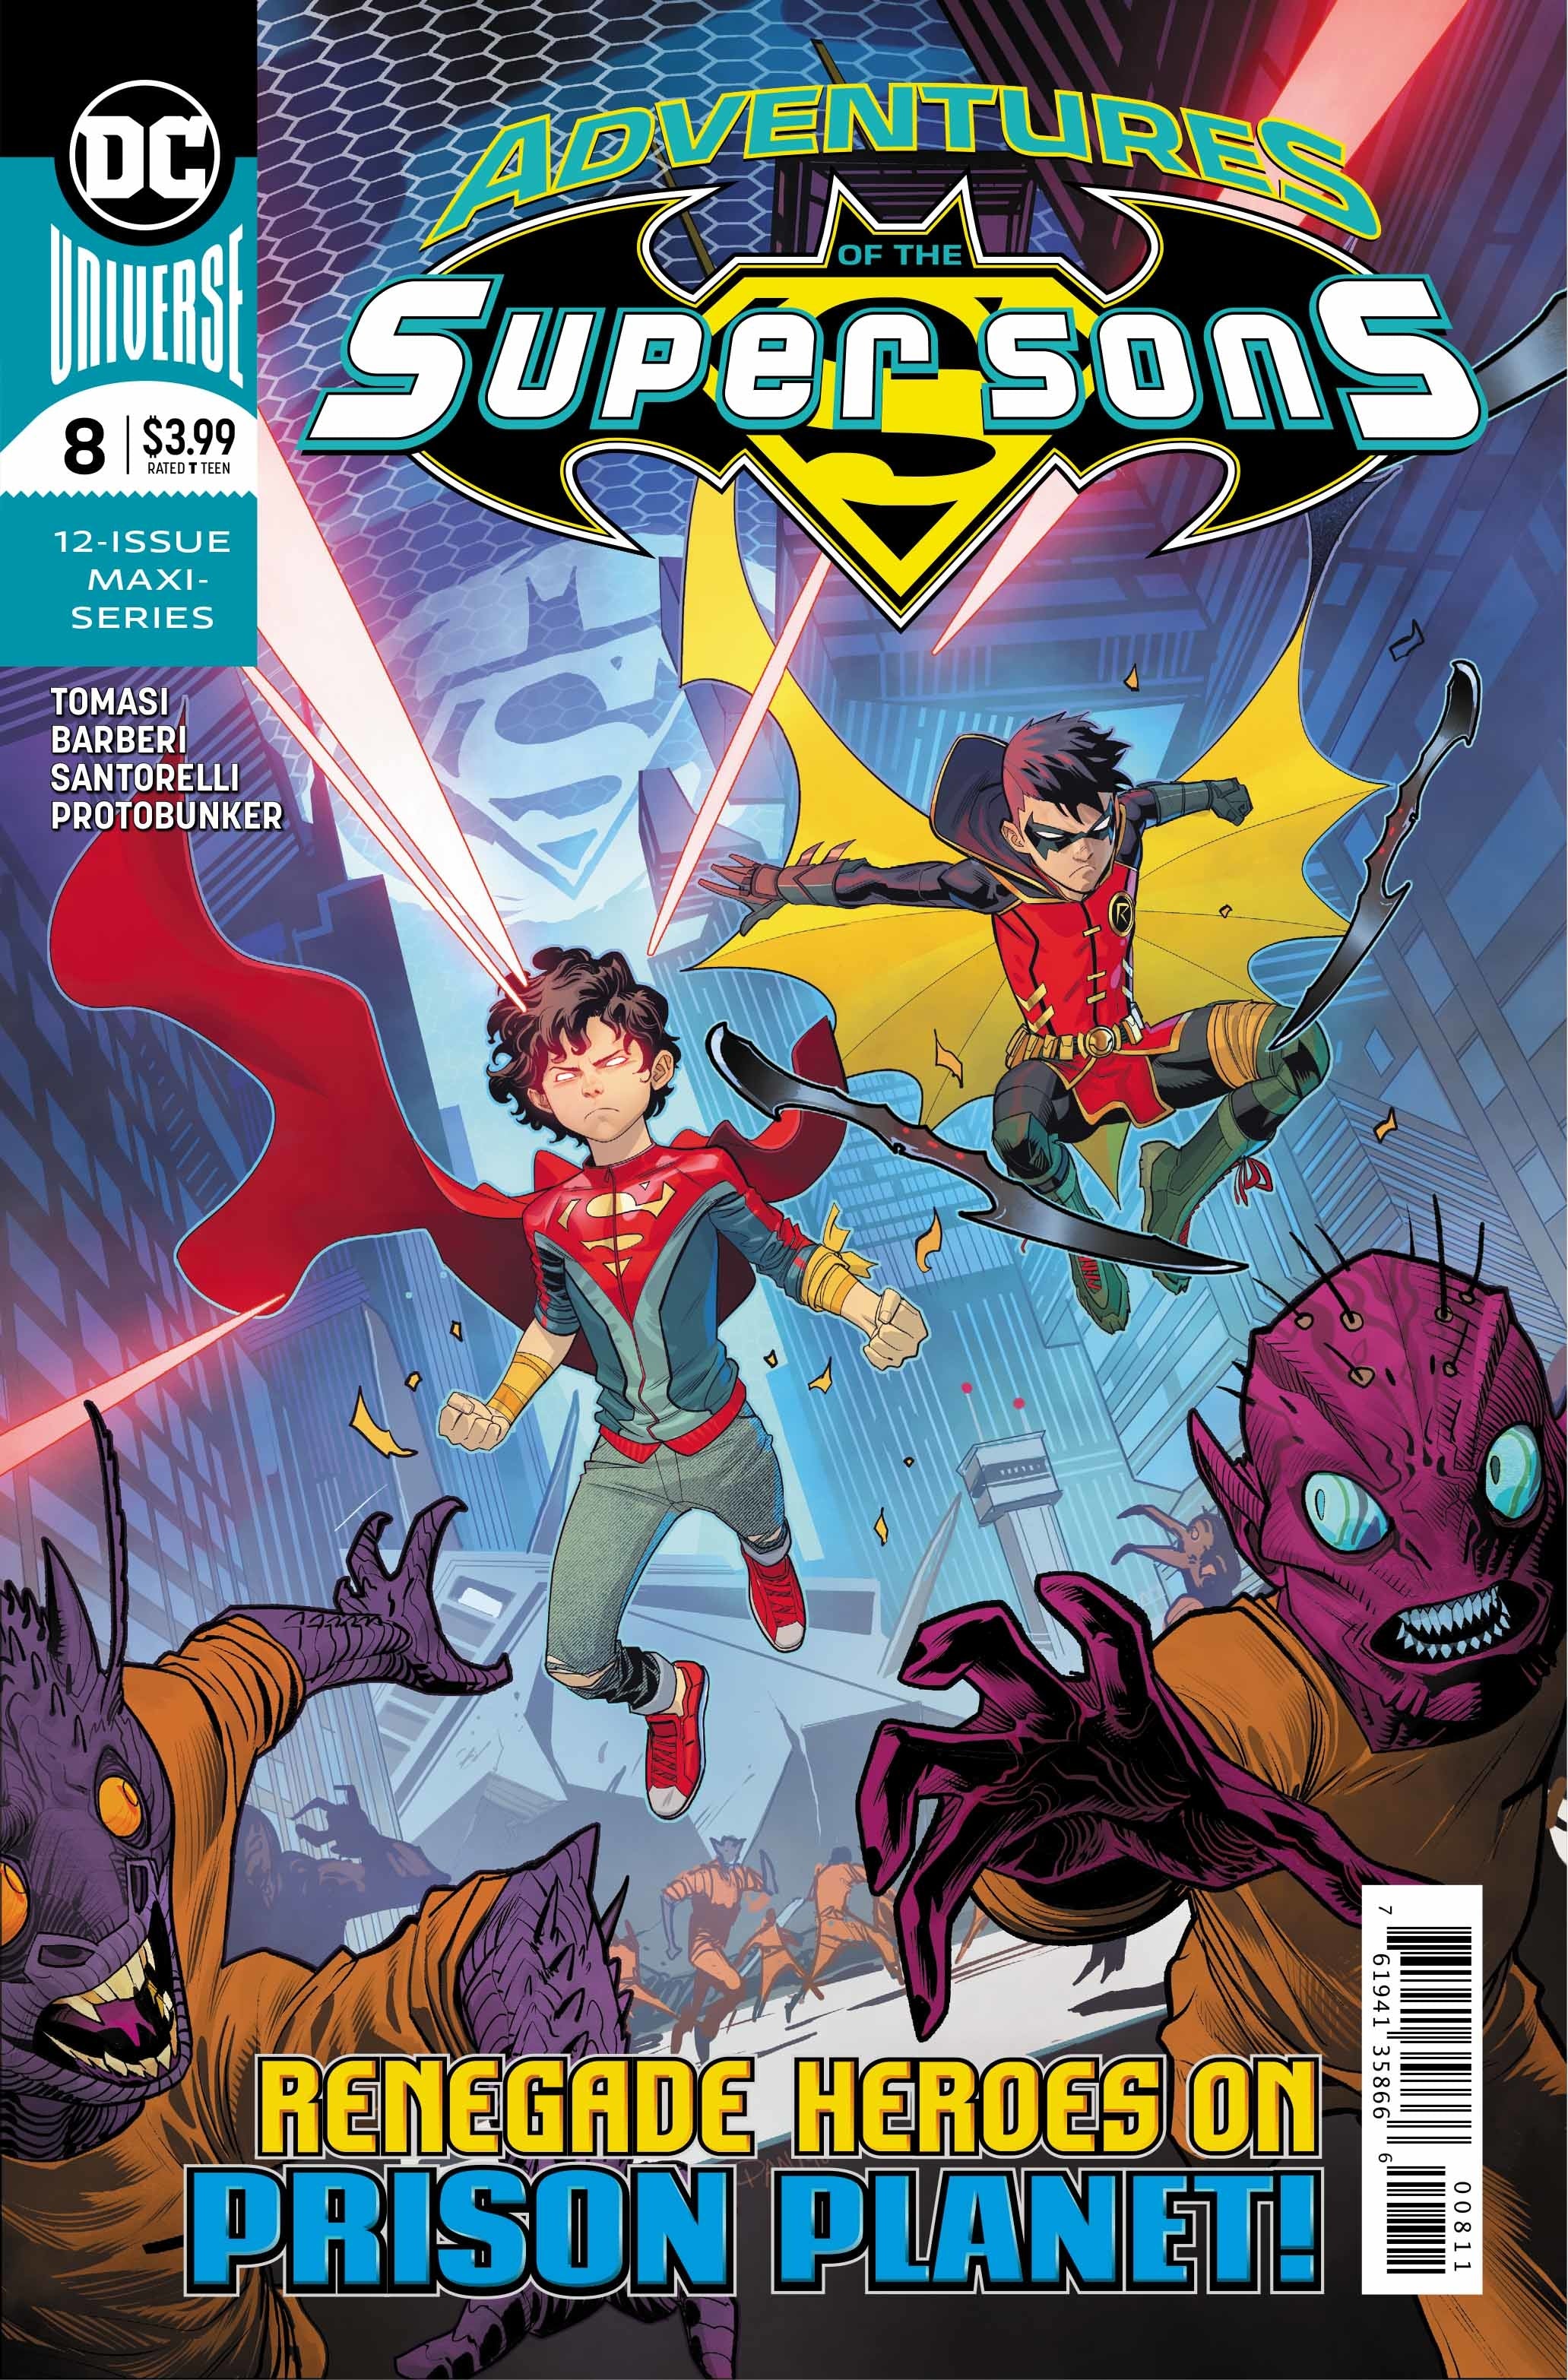 ADVENTURES OF THE SUPER SONS #8 (OF 12) | Game Master's Emporium (The New GME)